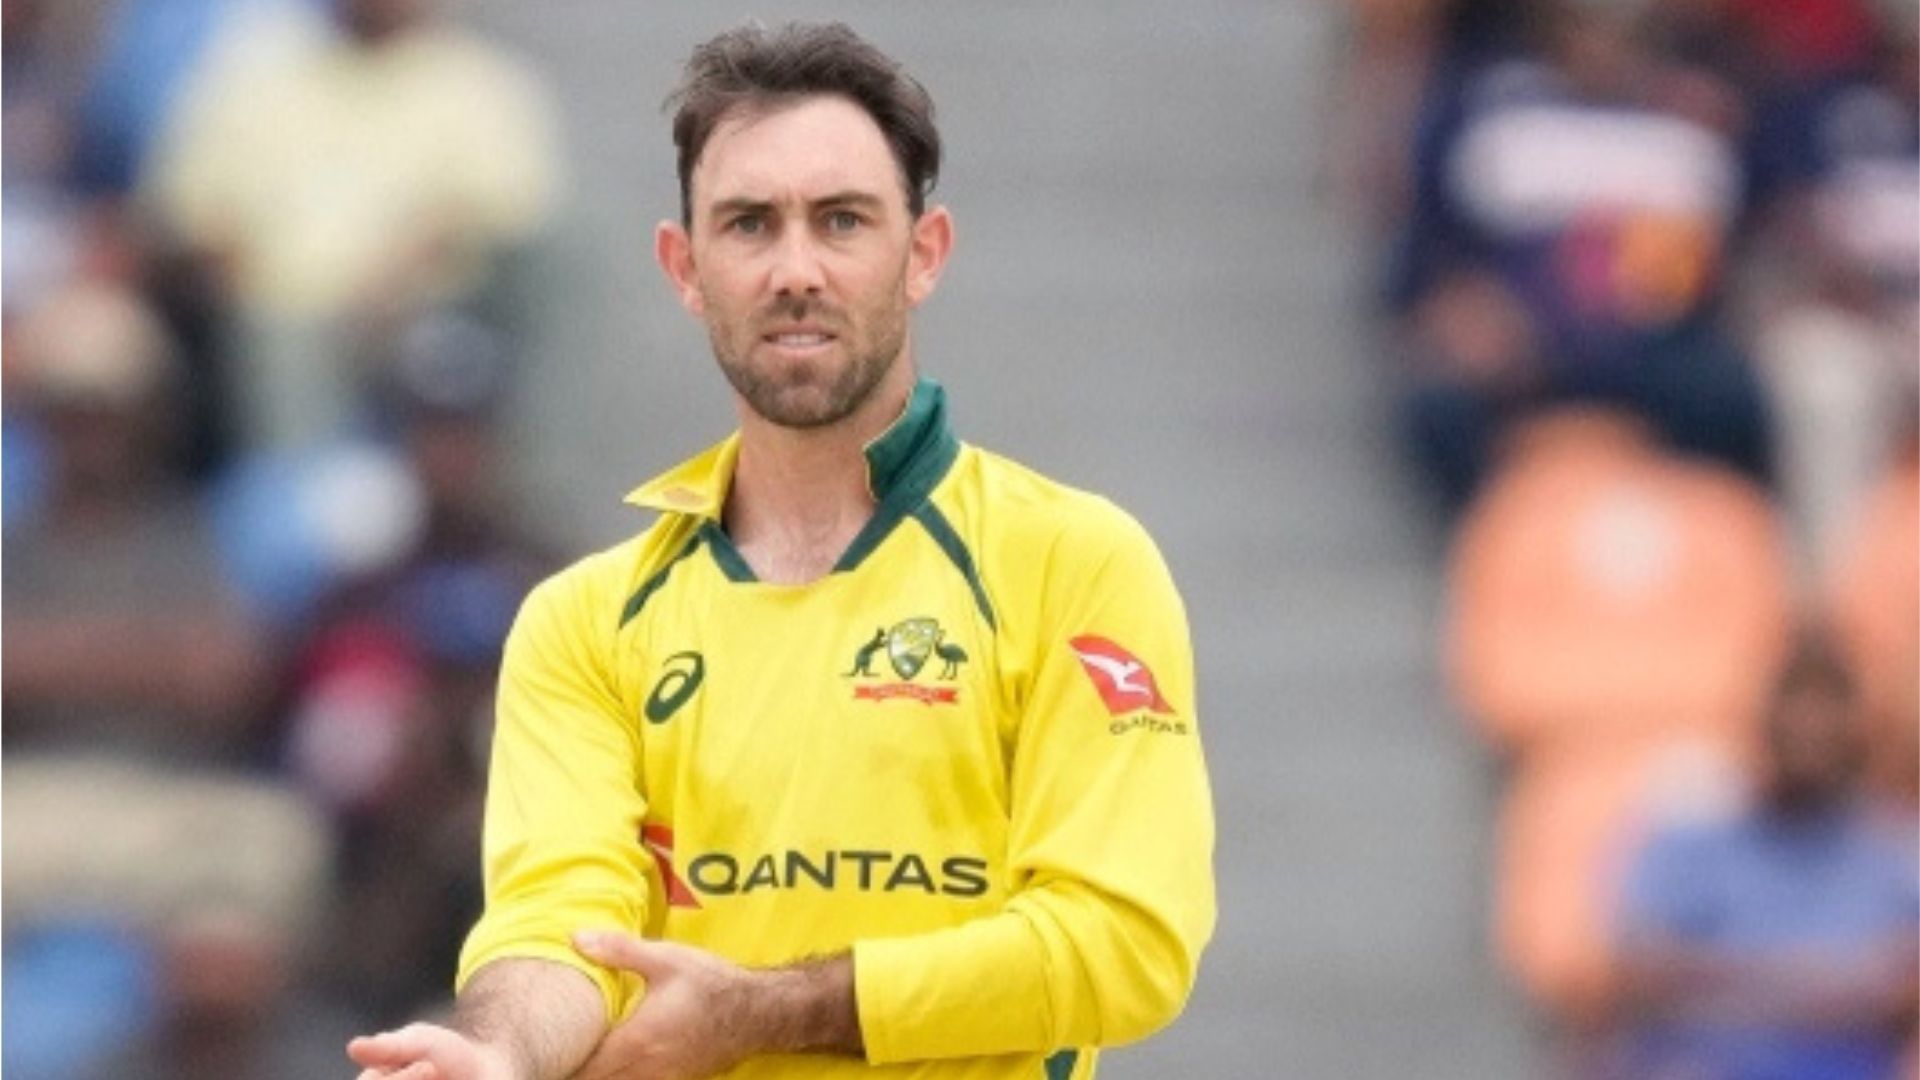 Glenn Maxwell suffered an ankle injury in the lead up to the T20I series against South Africa. 